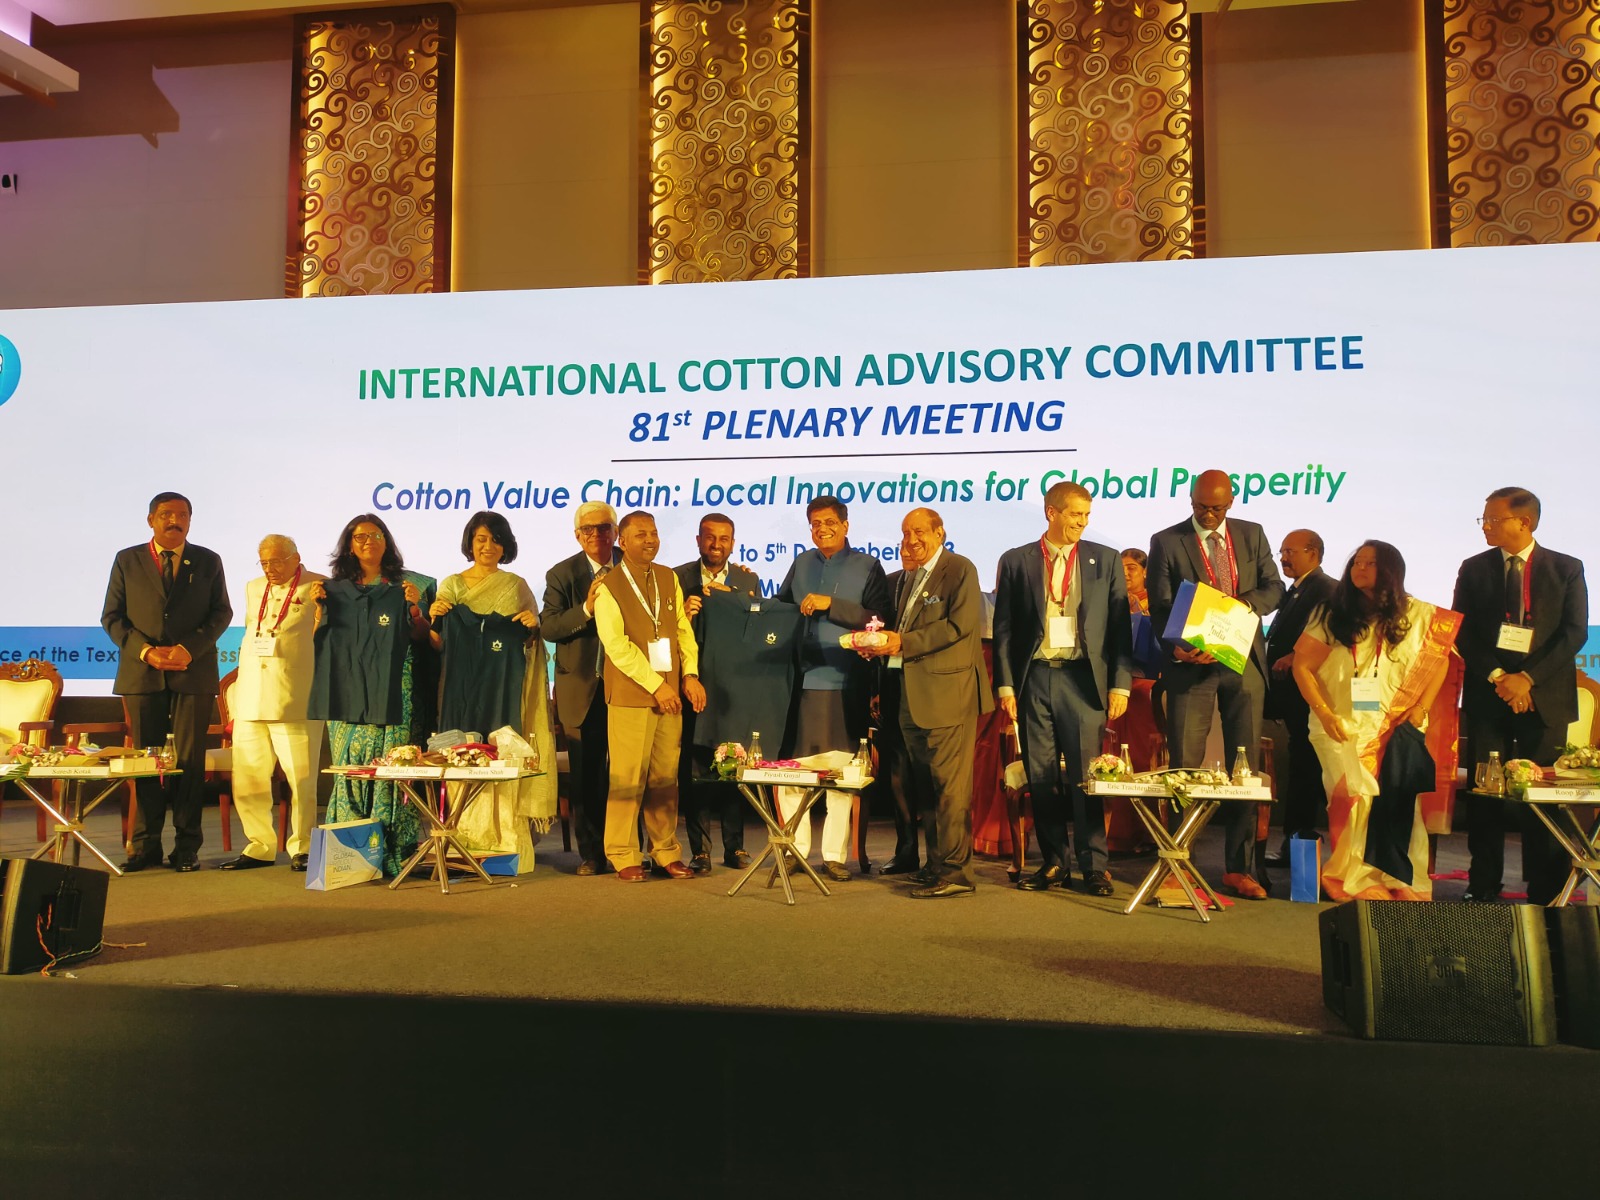 Hon’ble Union Minister, Shri Piyush Goyal ji, releasing the T-Shirt produced from Kasturi Cotton Bharat at the 81st Plenary Meeting of the (ICAC) held on 2nd Dec 2023 at the Jio Convention Centre, Mumbai